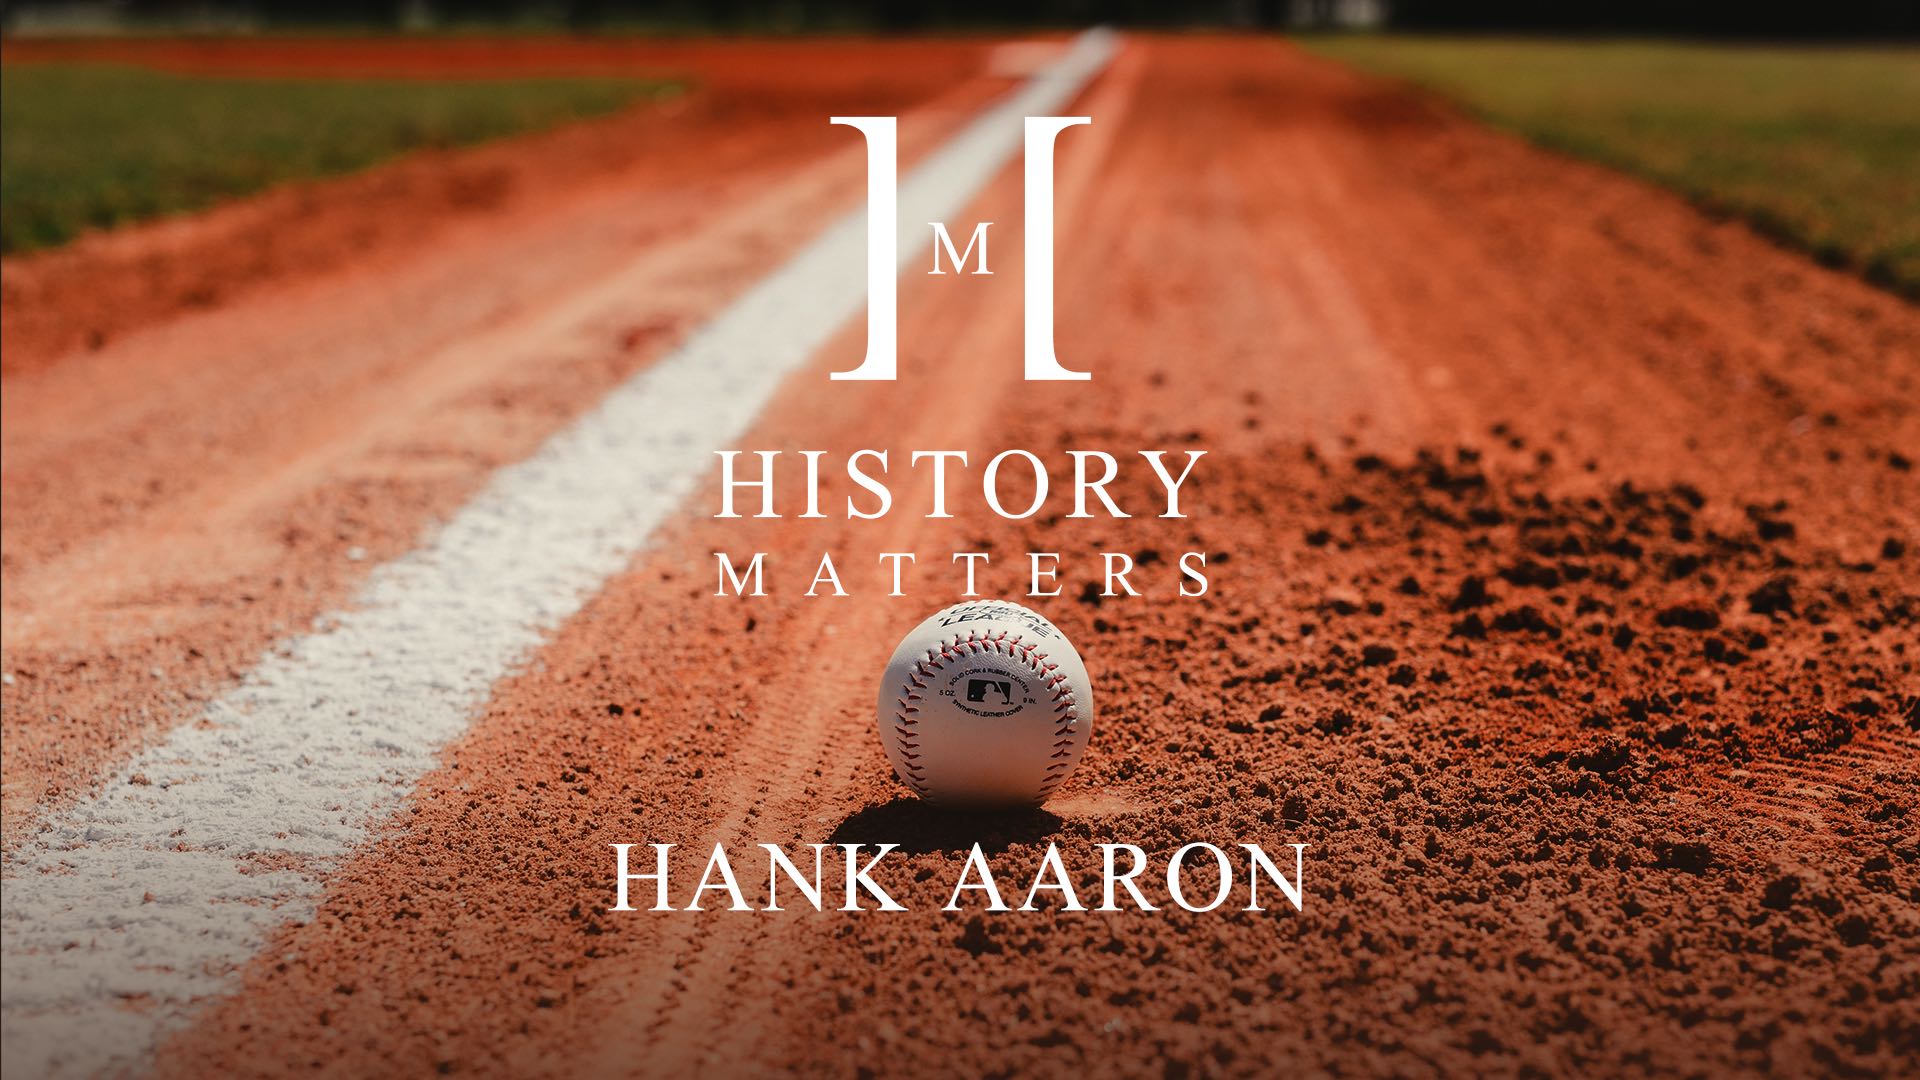 History Matters Hank Aaron by Bob Denison with background of a baseball near a baseline